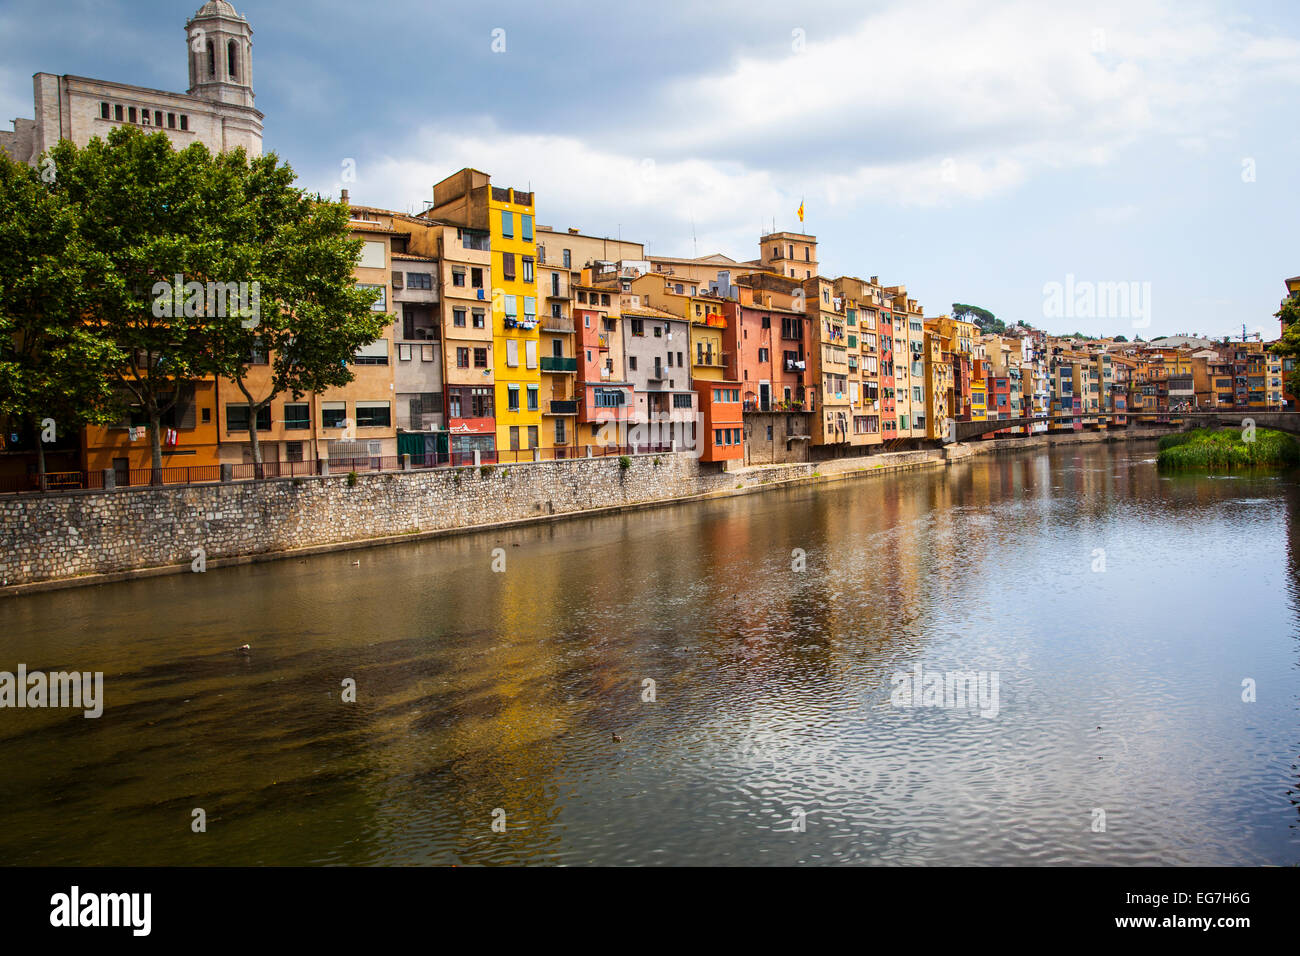 Colorful houses and apartments by the river Onyar in the historic city of Girona, Catalonia, Spain Stock Photo